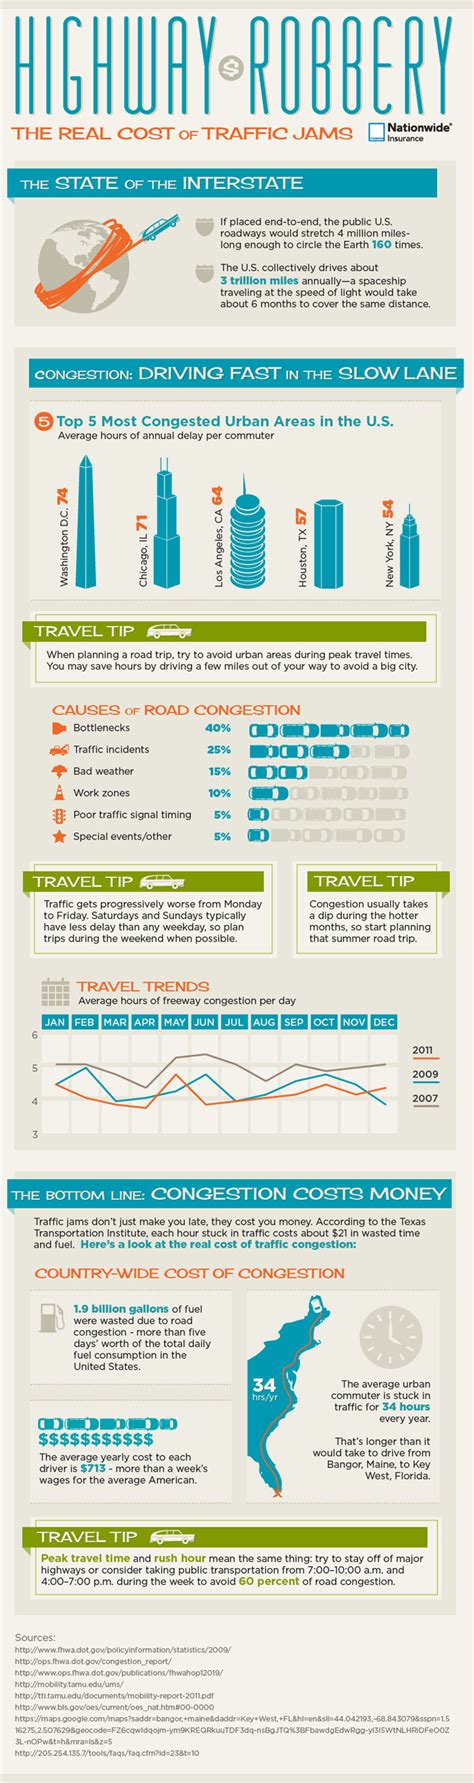 The Cost Of Traffic Congestion Infographic